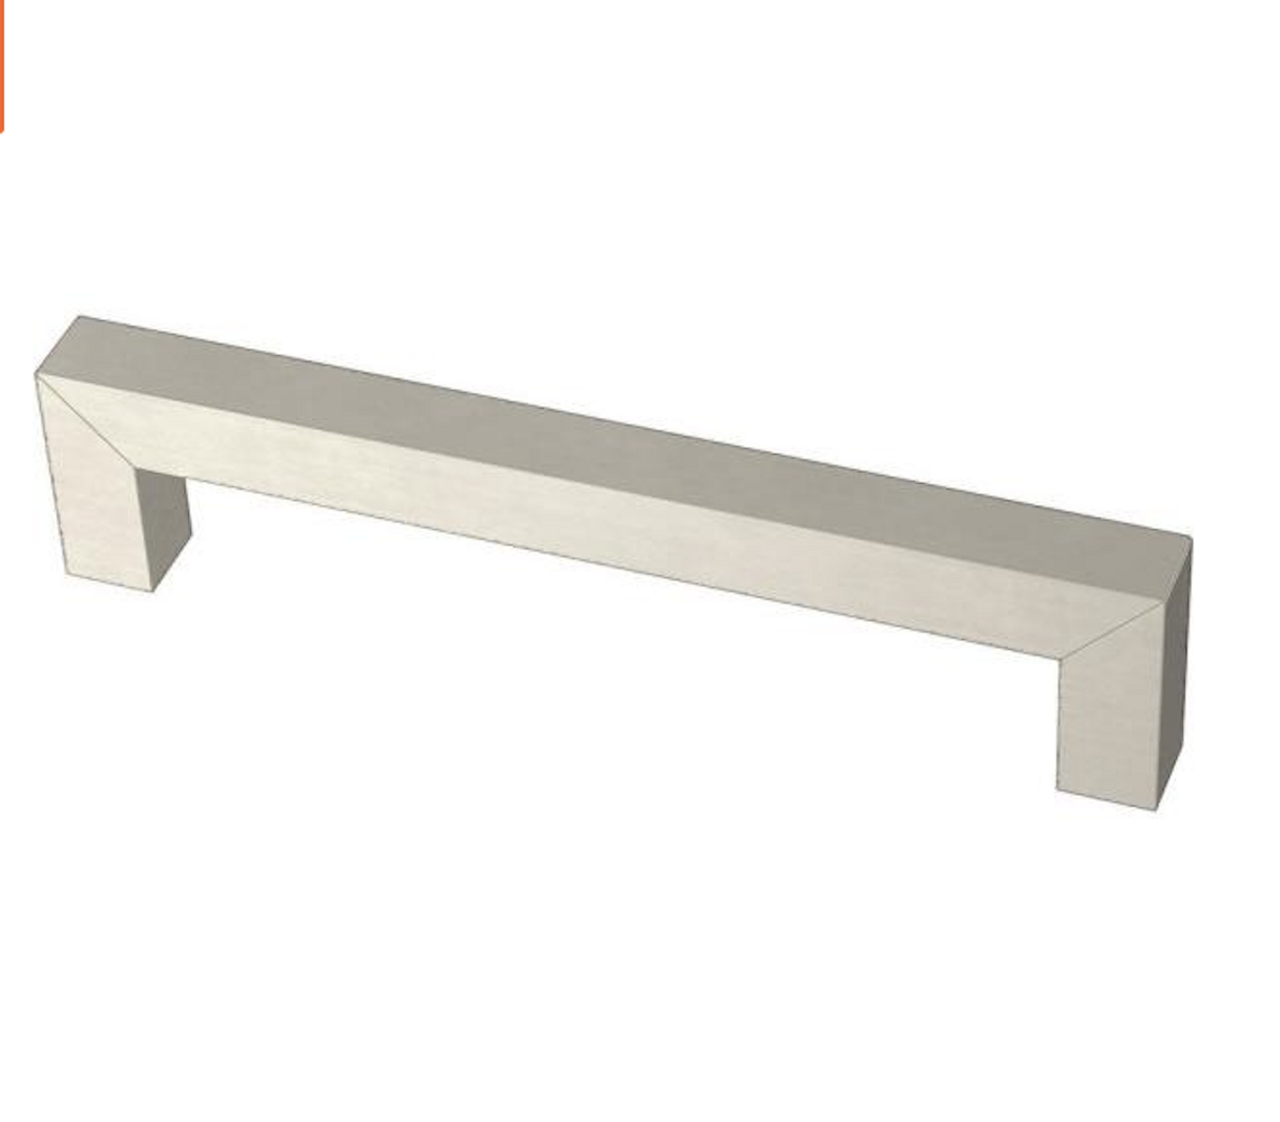 Liberty P41848C-SS Modern Square Bar Pull 51/16" Stainless Steel Drawer Pull